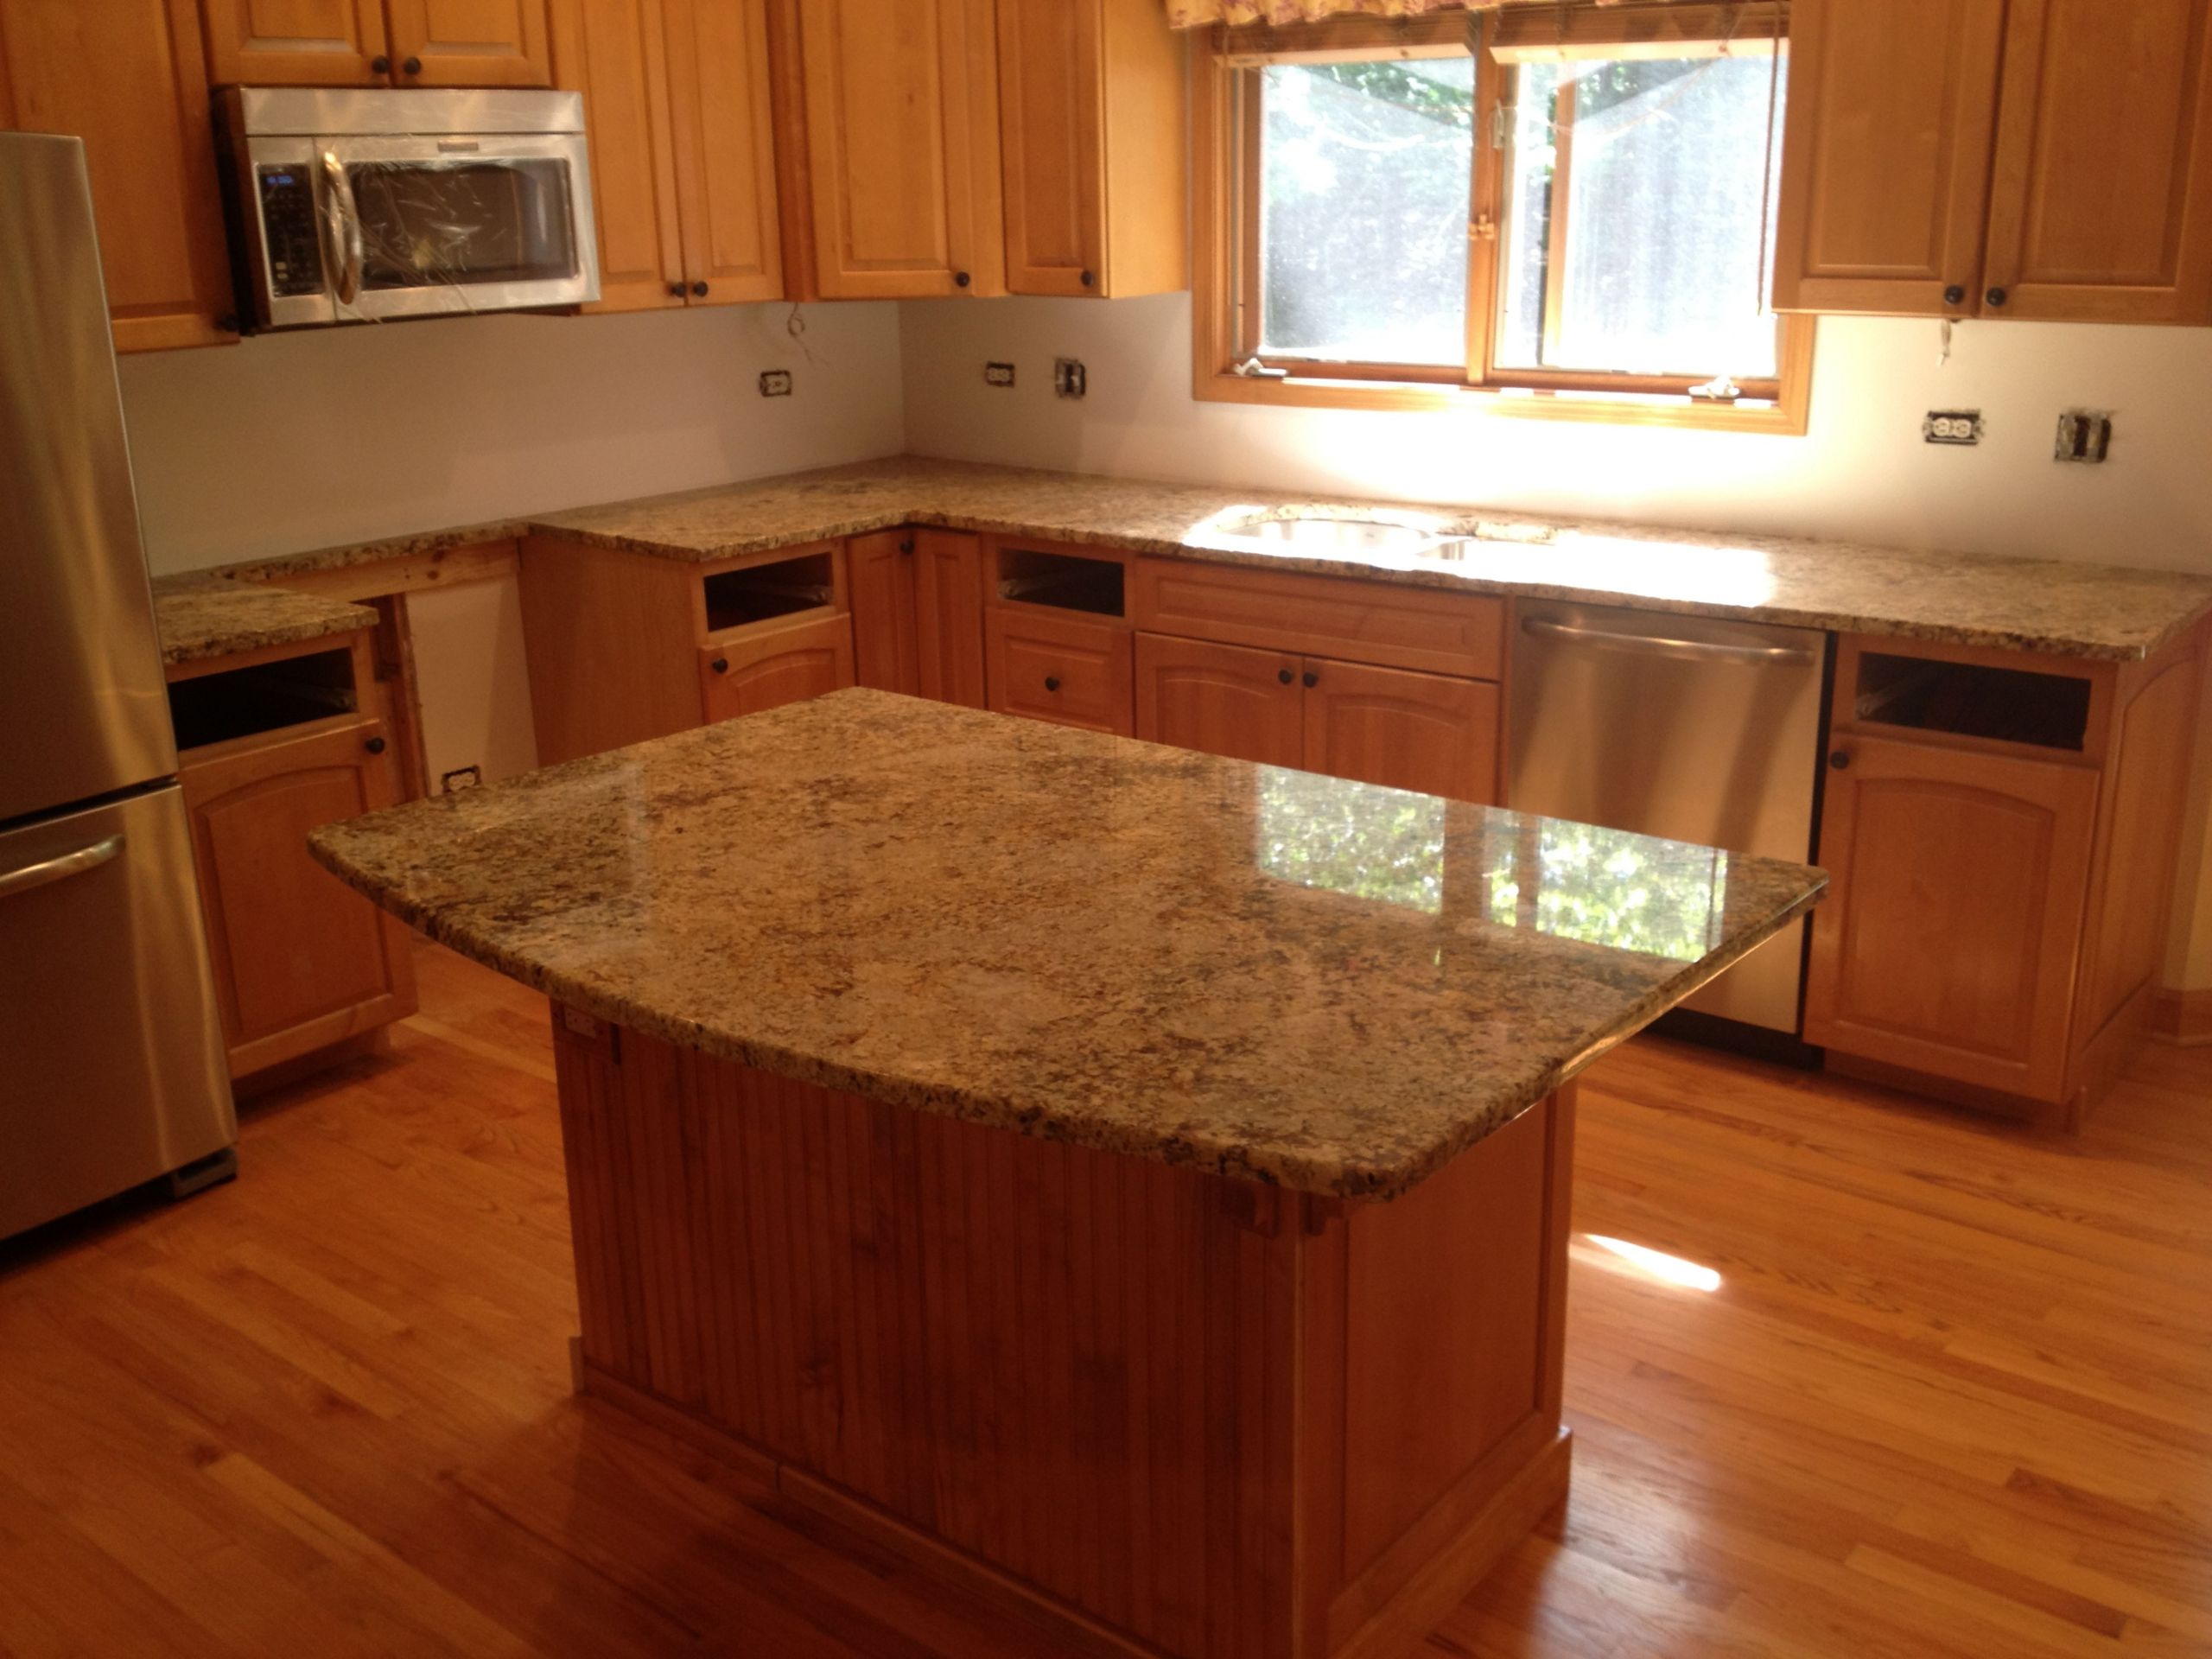 Kitchen Countertops Lowes
 Bathroom Fabulous Lowes Granite For Kitchen And Bathroom